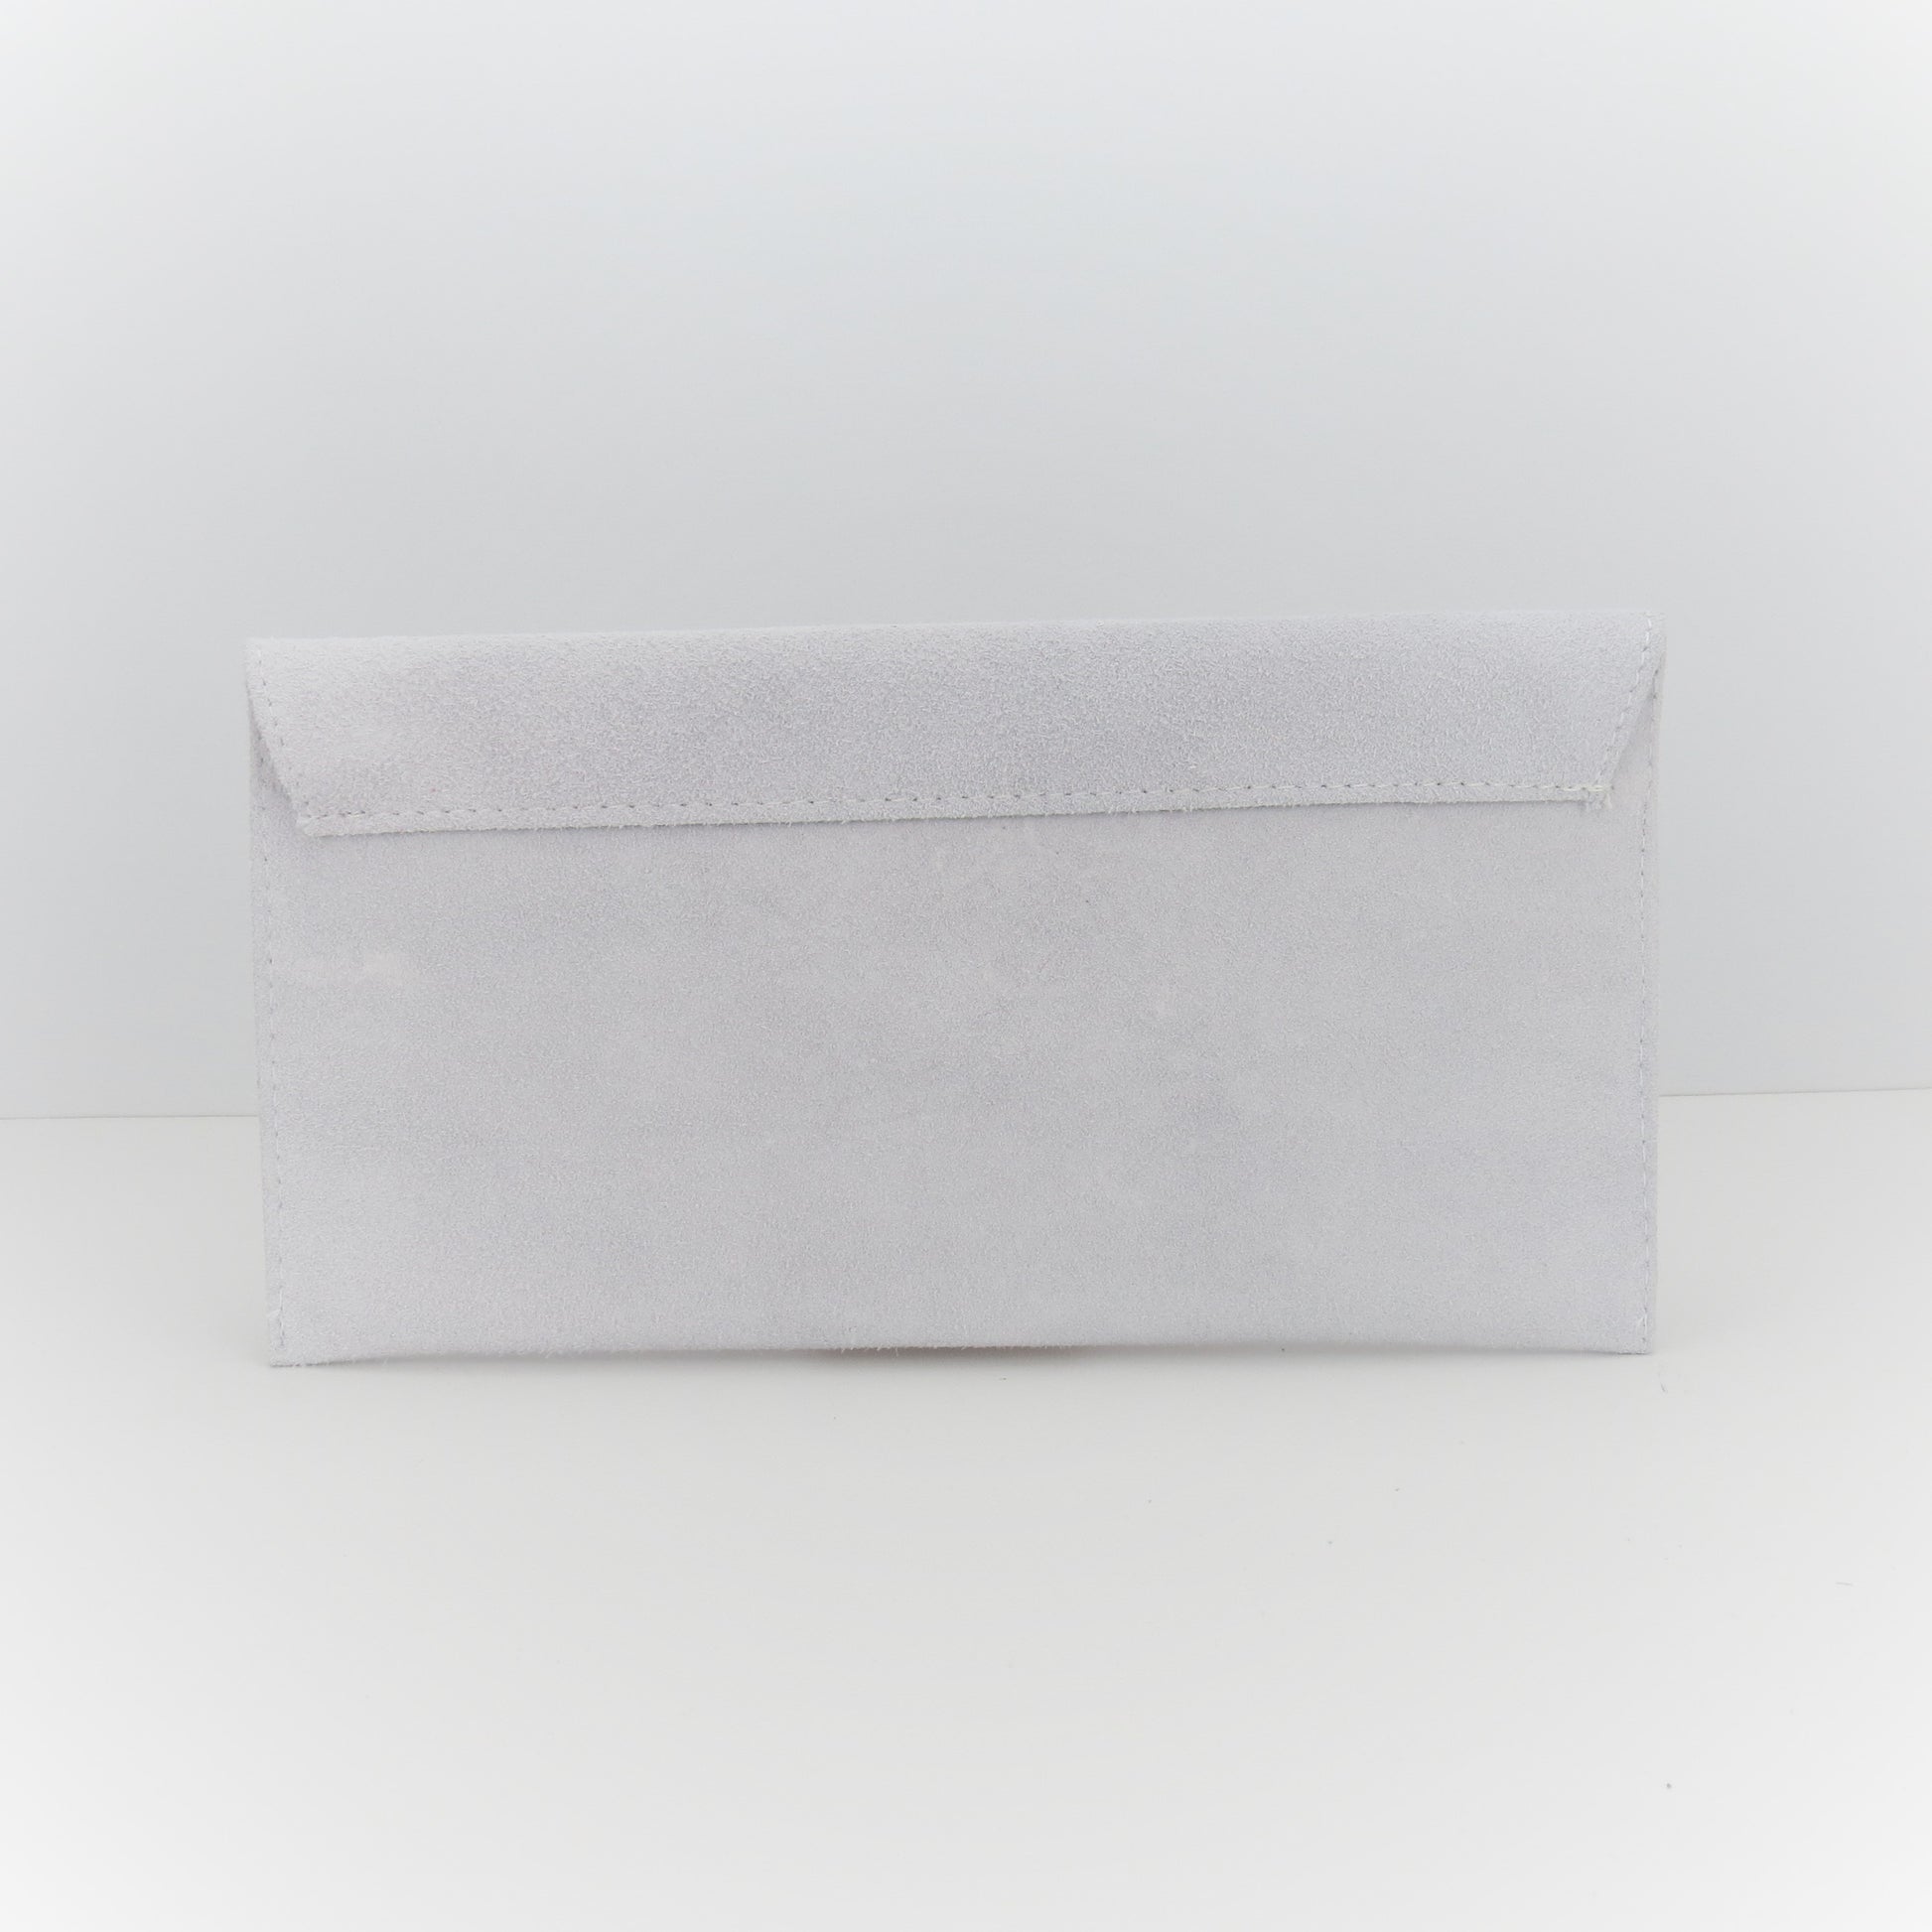 Moonstone Envelope Clutch Bag with chain strap